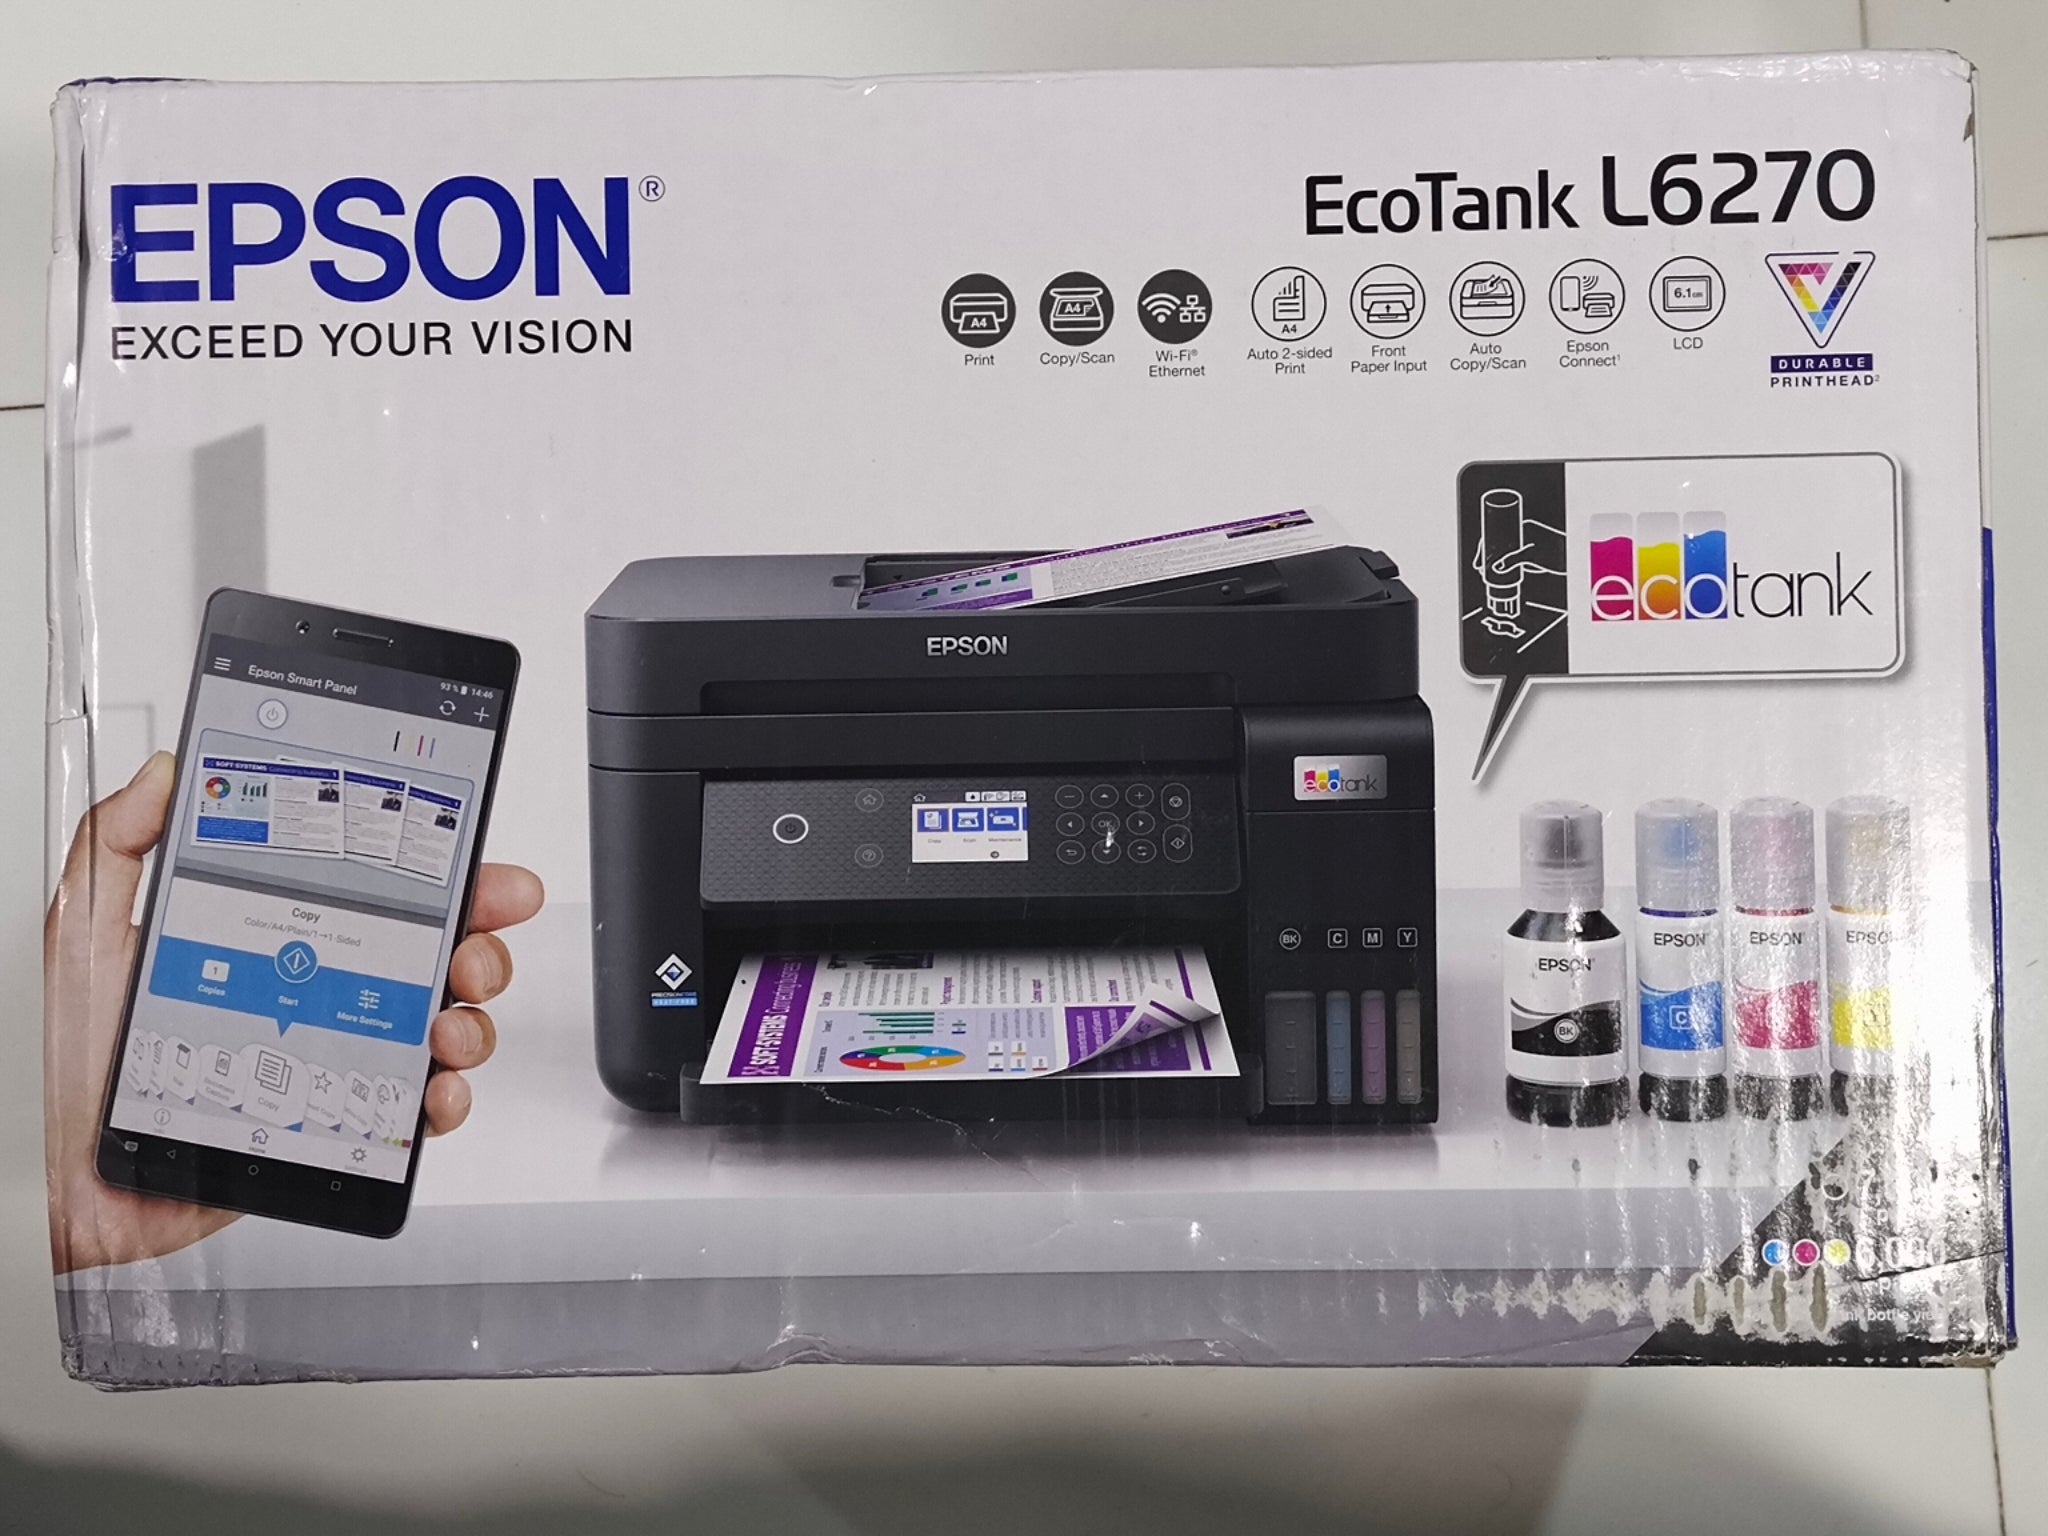 Epson EcoTank L6270 A4 Wi-Fi Duplex All-in-One Ink Tank Printer with ADF (6927394865237)